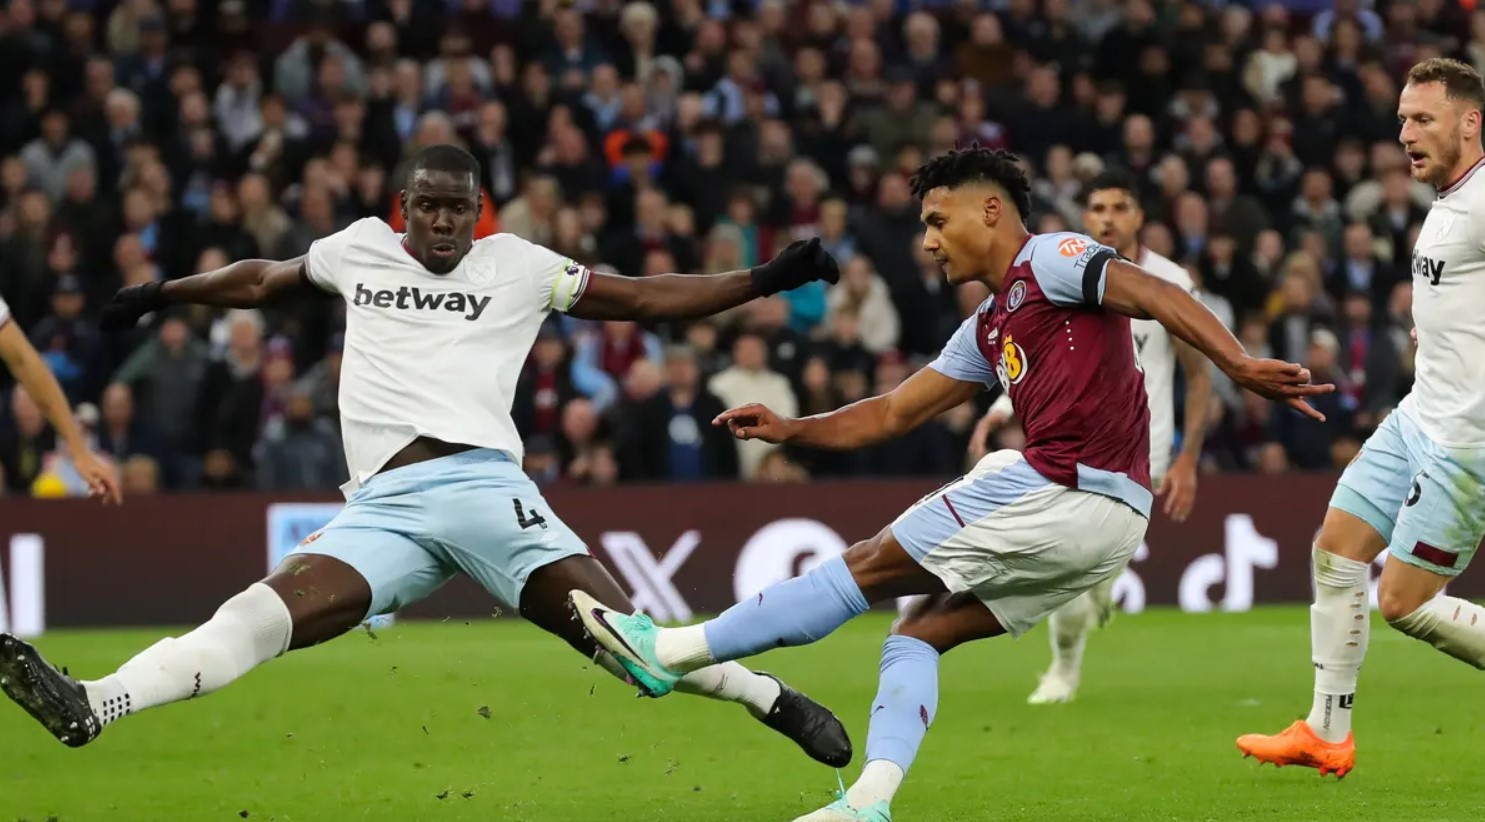 ‘Manage the game better’ – Zouma opened up about the team’s recent disappointing 4-1 defeat to Aston Villa